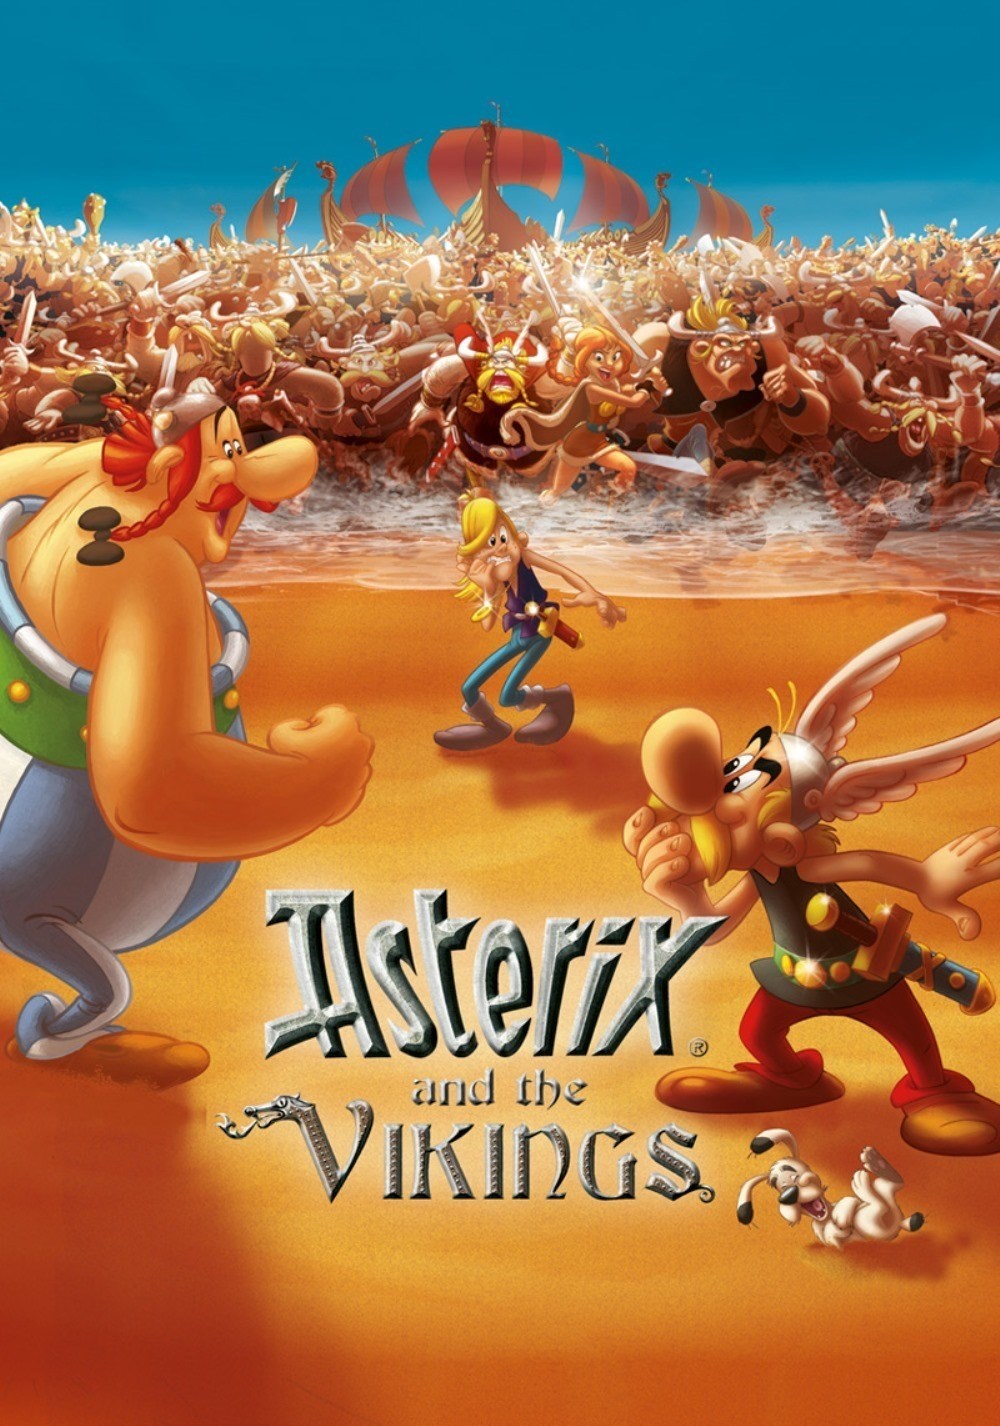 Asterix And The Vikings HD wallpapers, Desktop wallpaper - most viewed